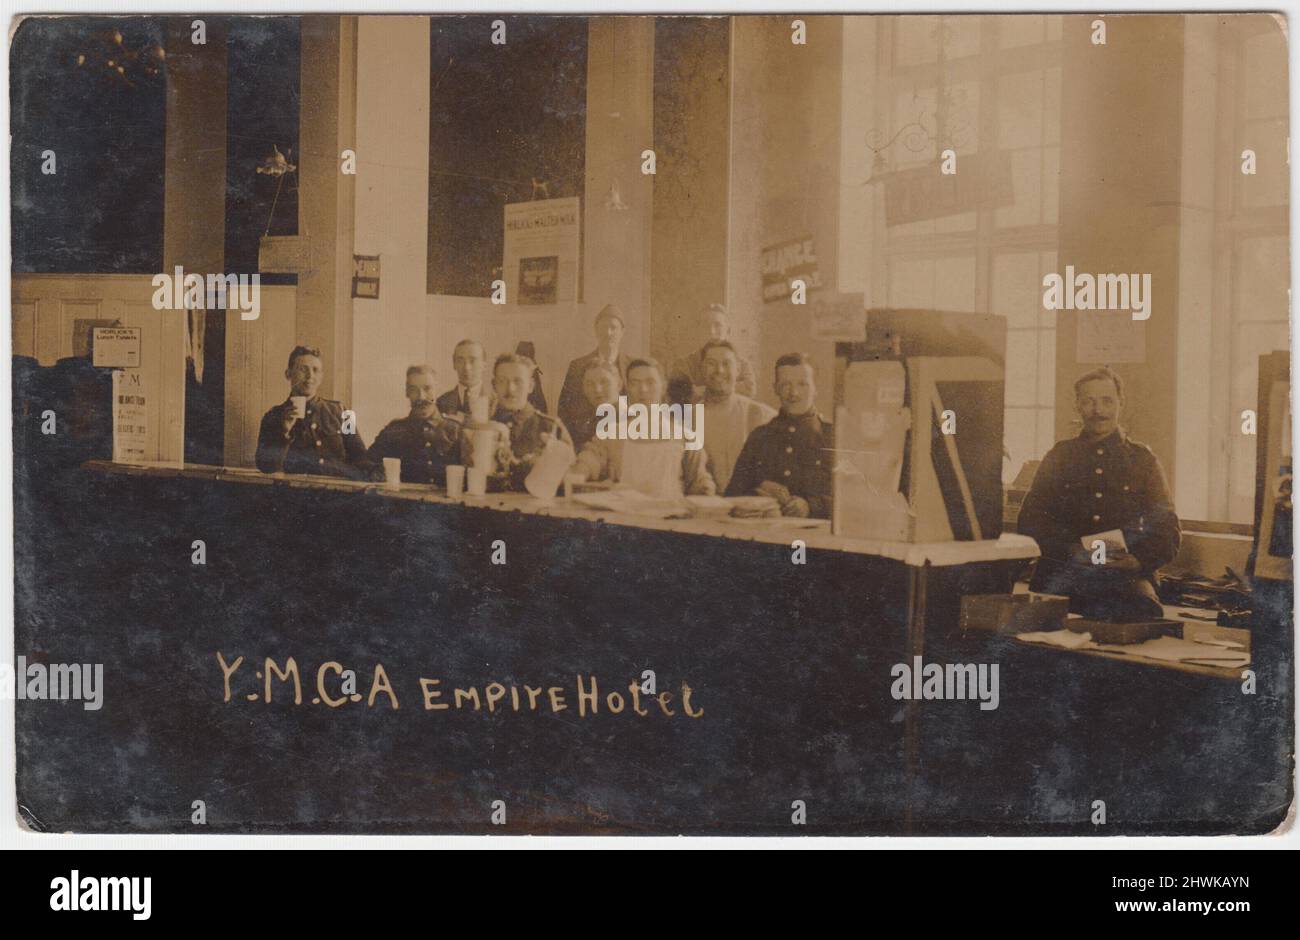 Young Men's Christian Association (YWCA) Empire Hotel, First World War: Photograph of the inside of a YWCA hotel, hut or hostel. The image shows a long counter with men standing behind, most in army uniform. There are notices which say 'Post Office', 'Change given' and adverts for Horlicks malted milk and lunch tablets Stock Photo